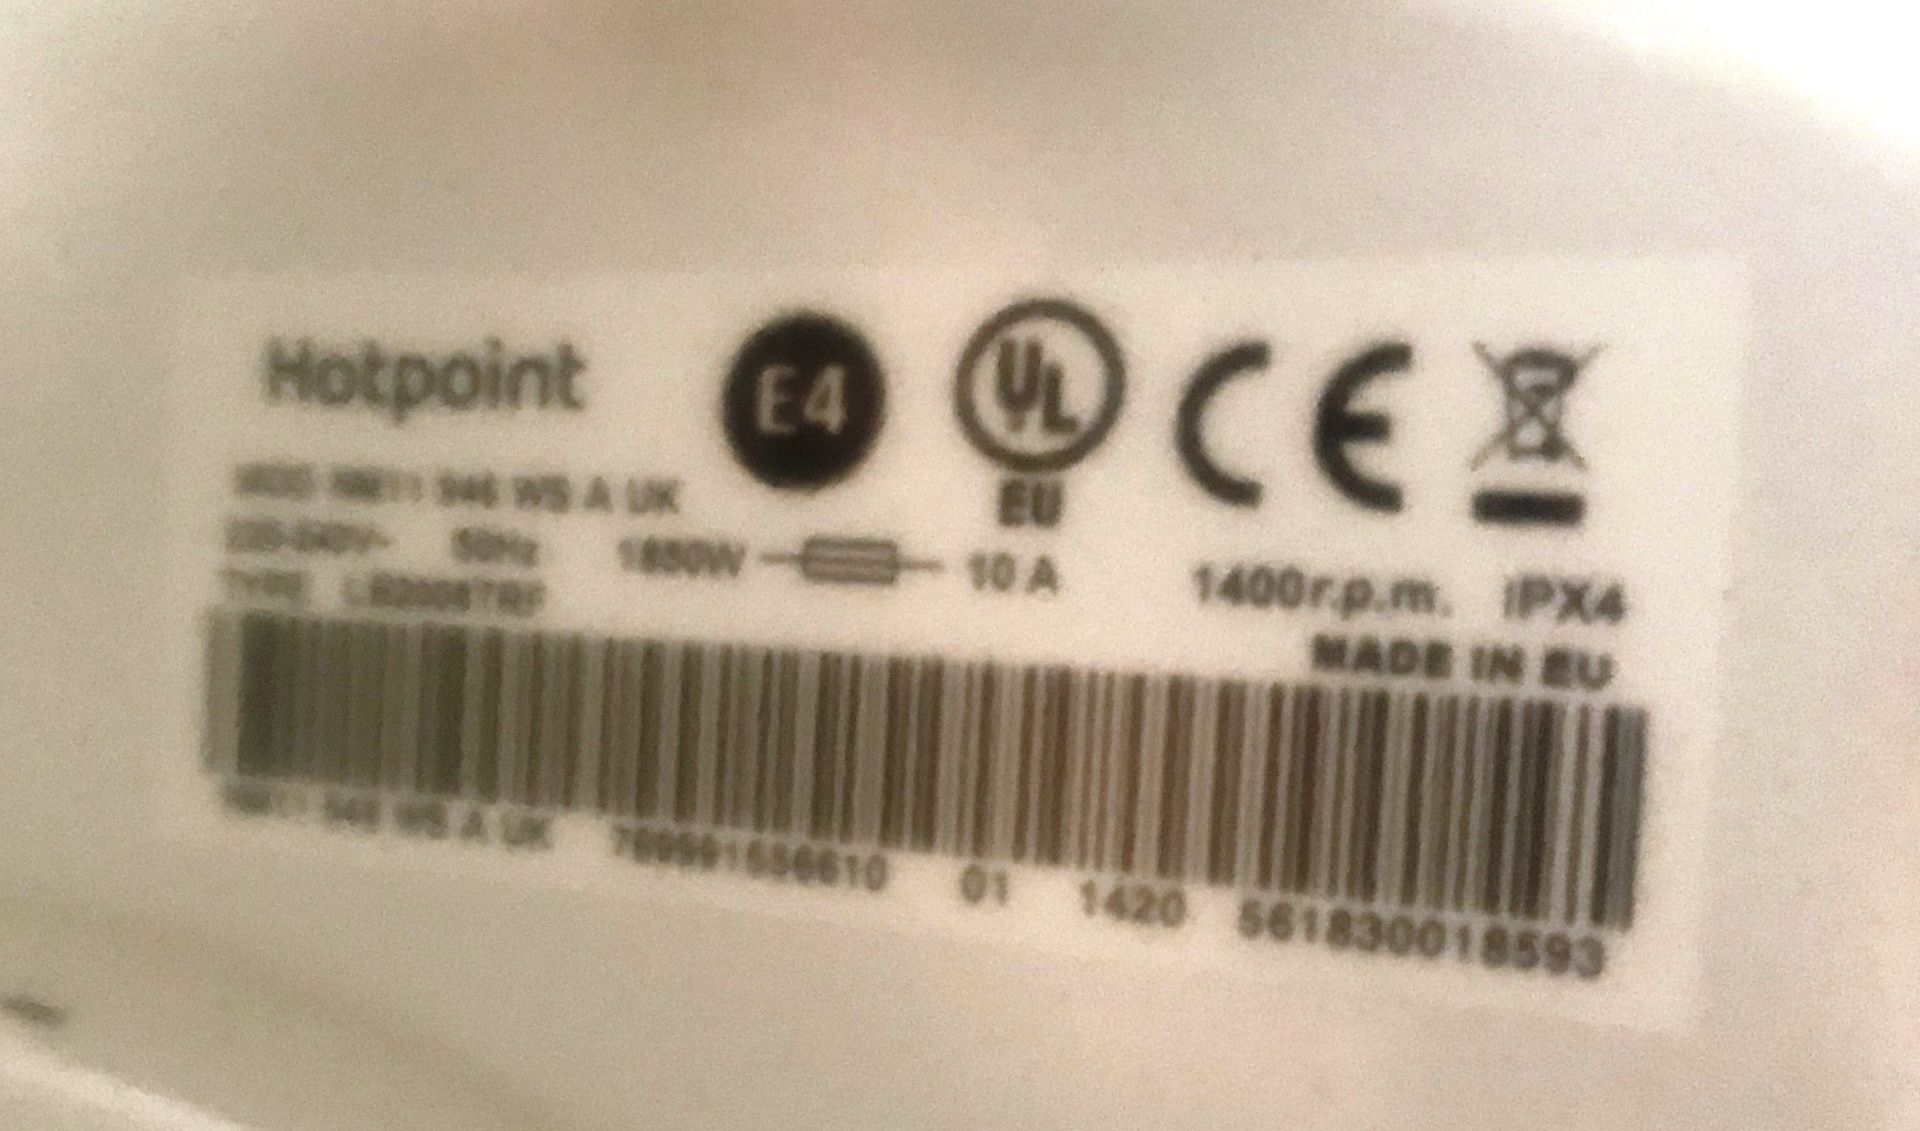 New Hotpoint NM11 946 WS A Washing Machine - White - RRP £329 - Image 4 of 5